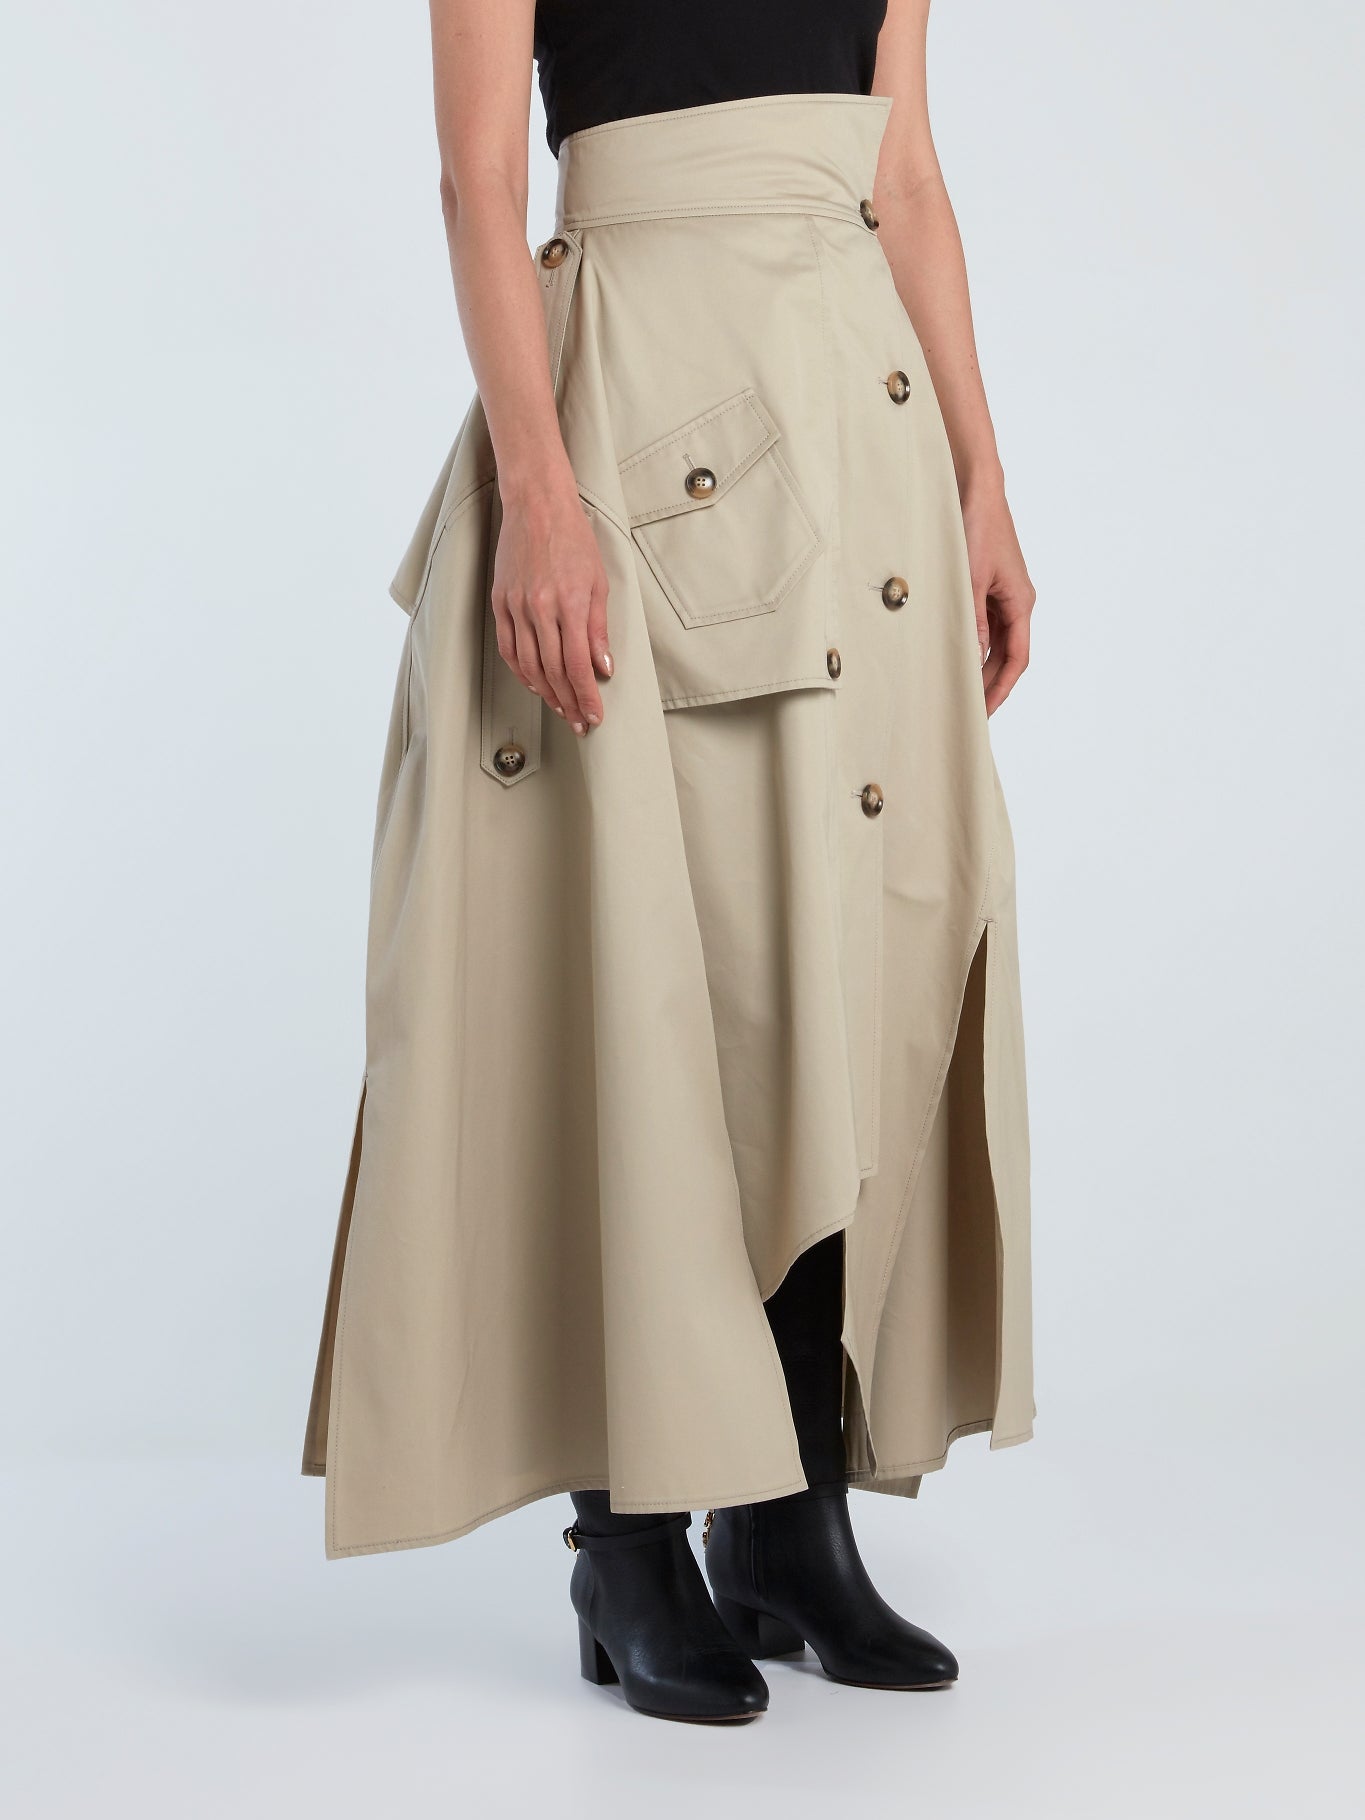 Reconstructed Trench Form Maxi Global – Maison-B-More Store Skirt